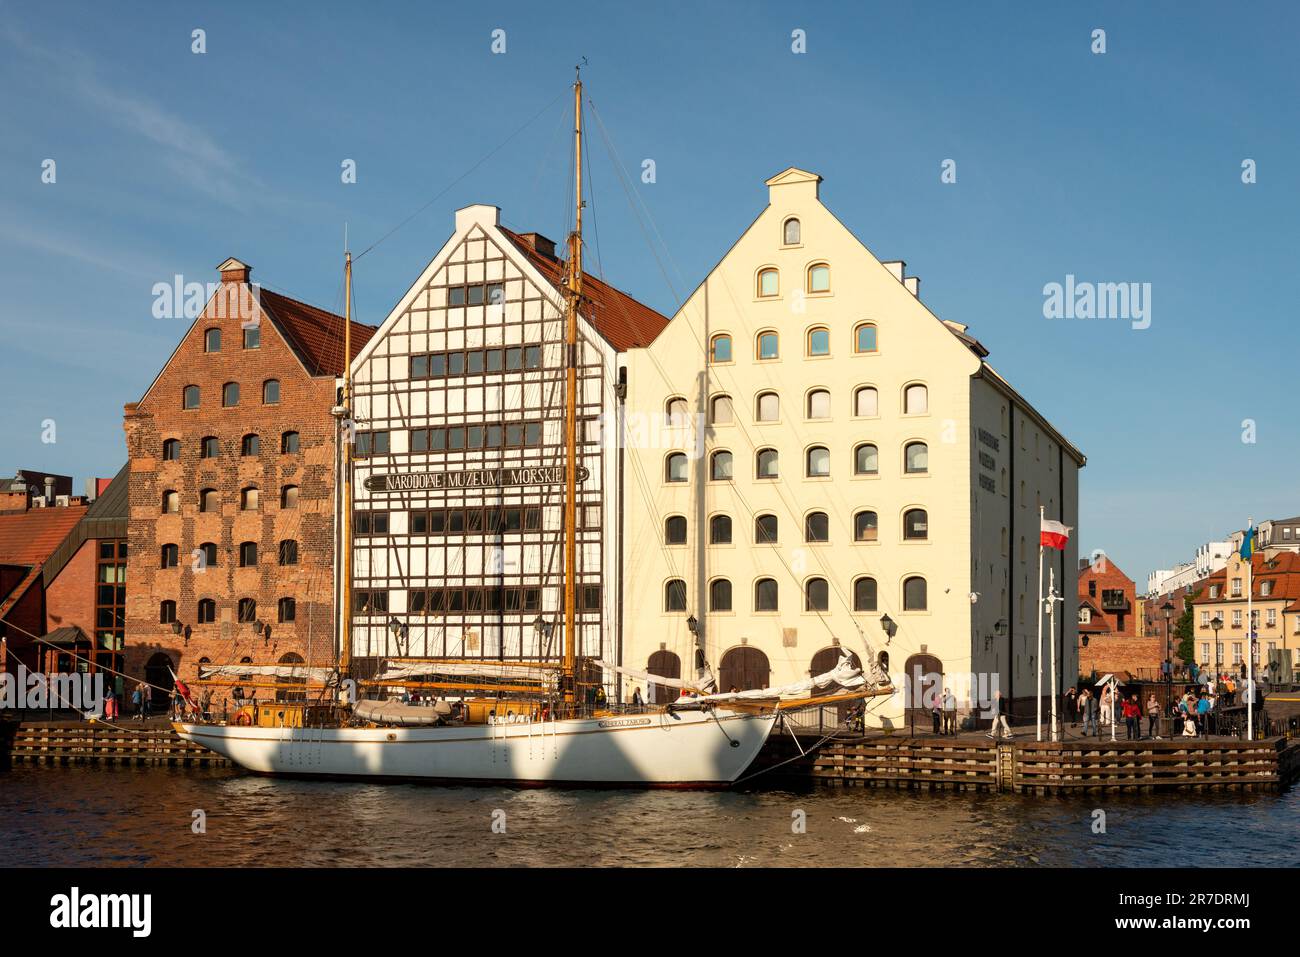 National Maritime Museum by the Motlava River in the Old Town of Gdansk, Poland Stock Photo